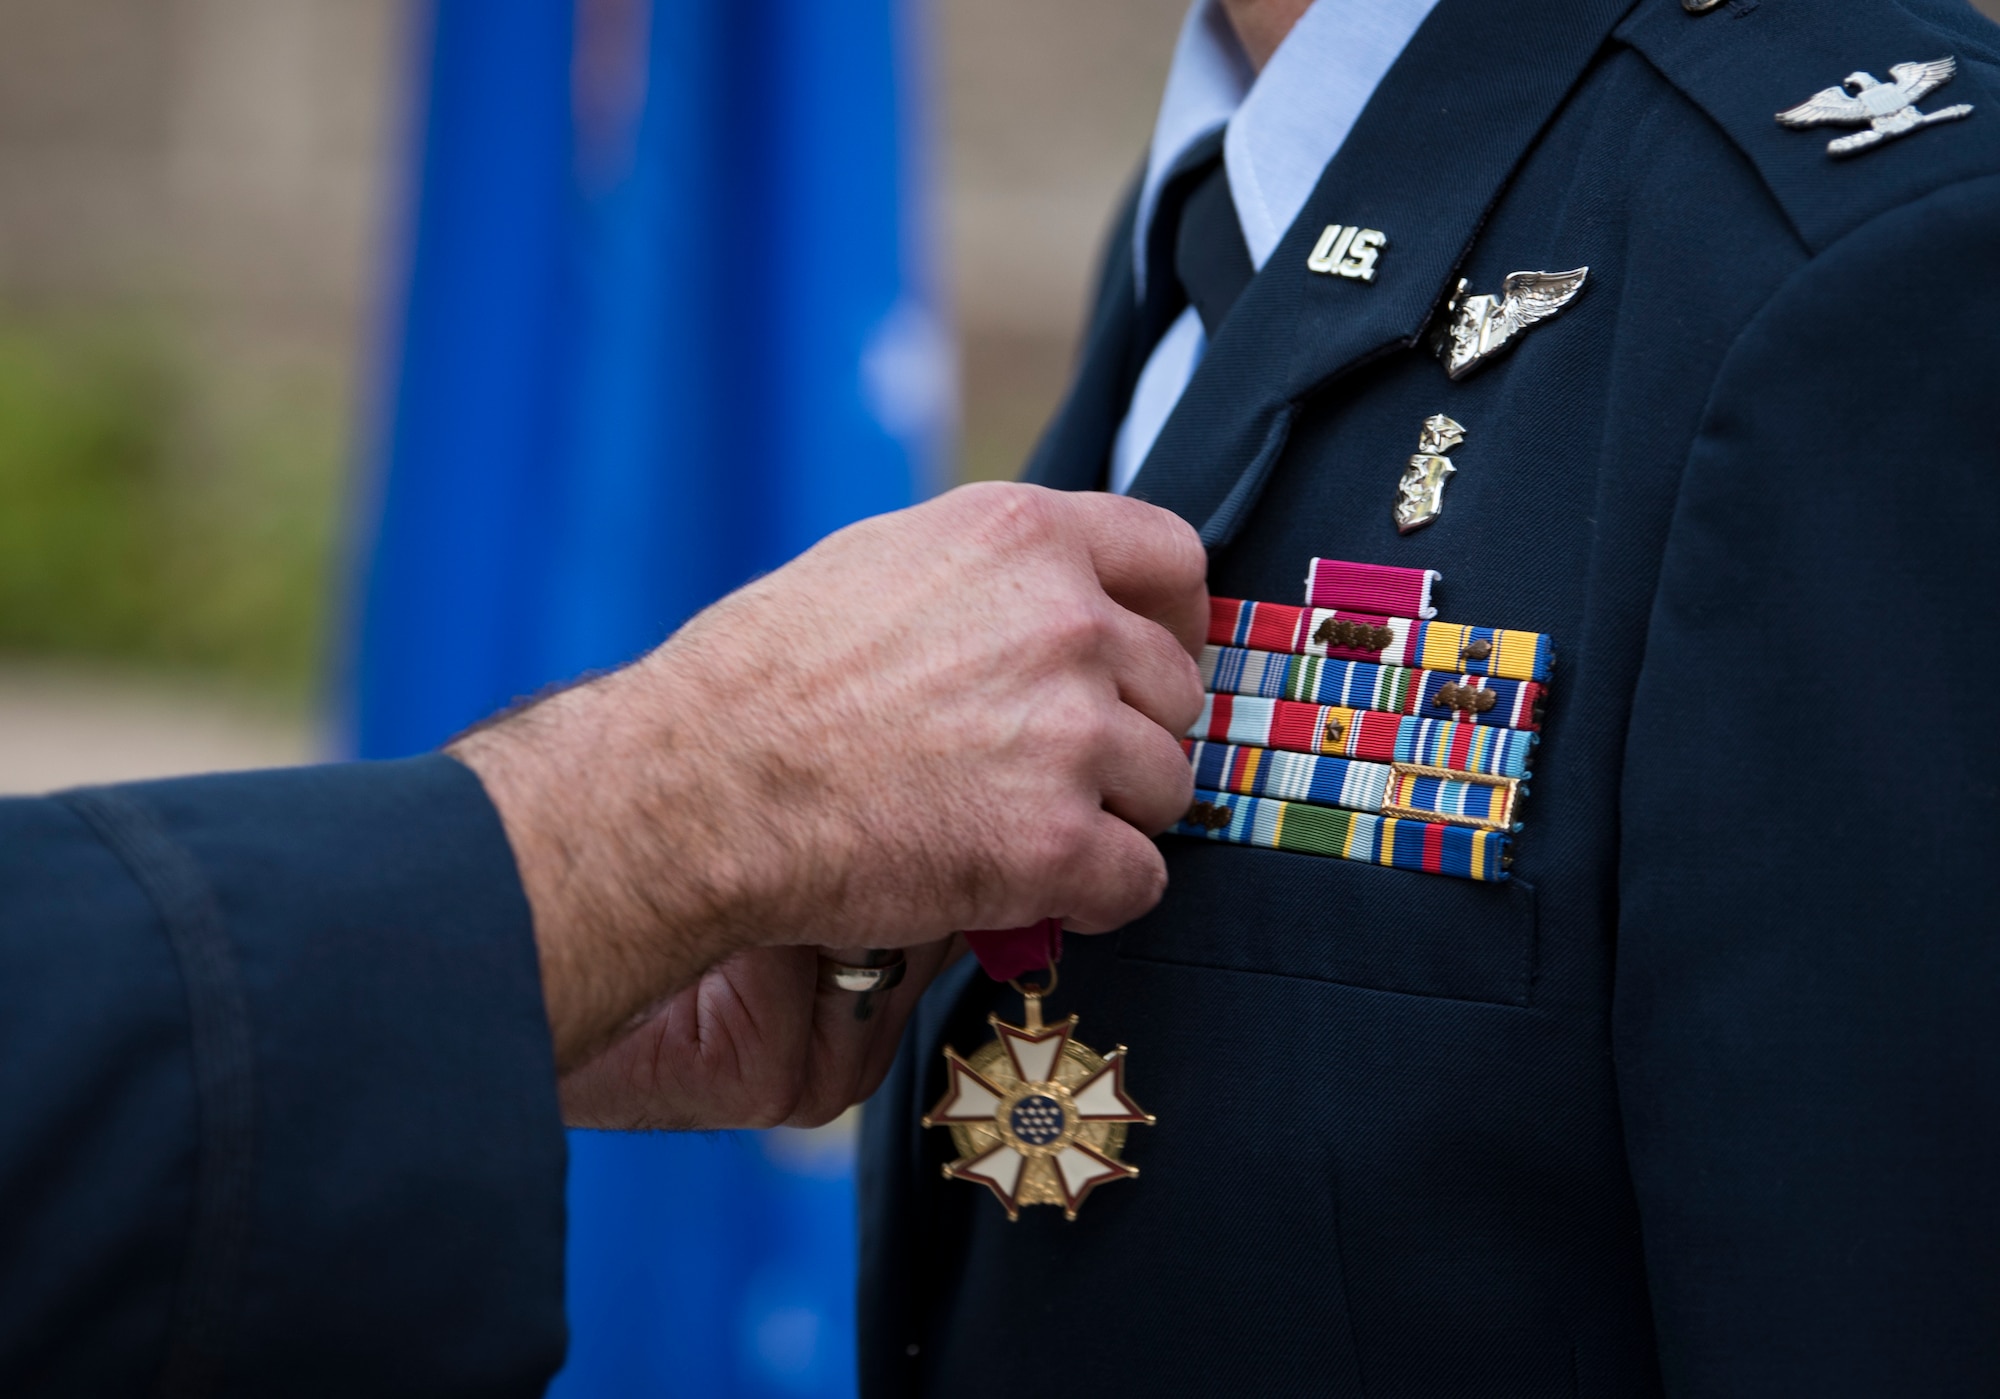 Col. Cavan Craddock, 99th Air Base Wing commander, awards a Legion of Merit to Col. Virginia Garner, 99th Medical Group commander during a change of command ceremony at Nellis Air Force Base, Nevada, June 29, 2018. The Legion of Merit is awarded for exceptional service. (U.S. Air Force photo by Airman 1st Class Andrew D. Sarver)